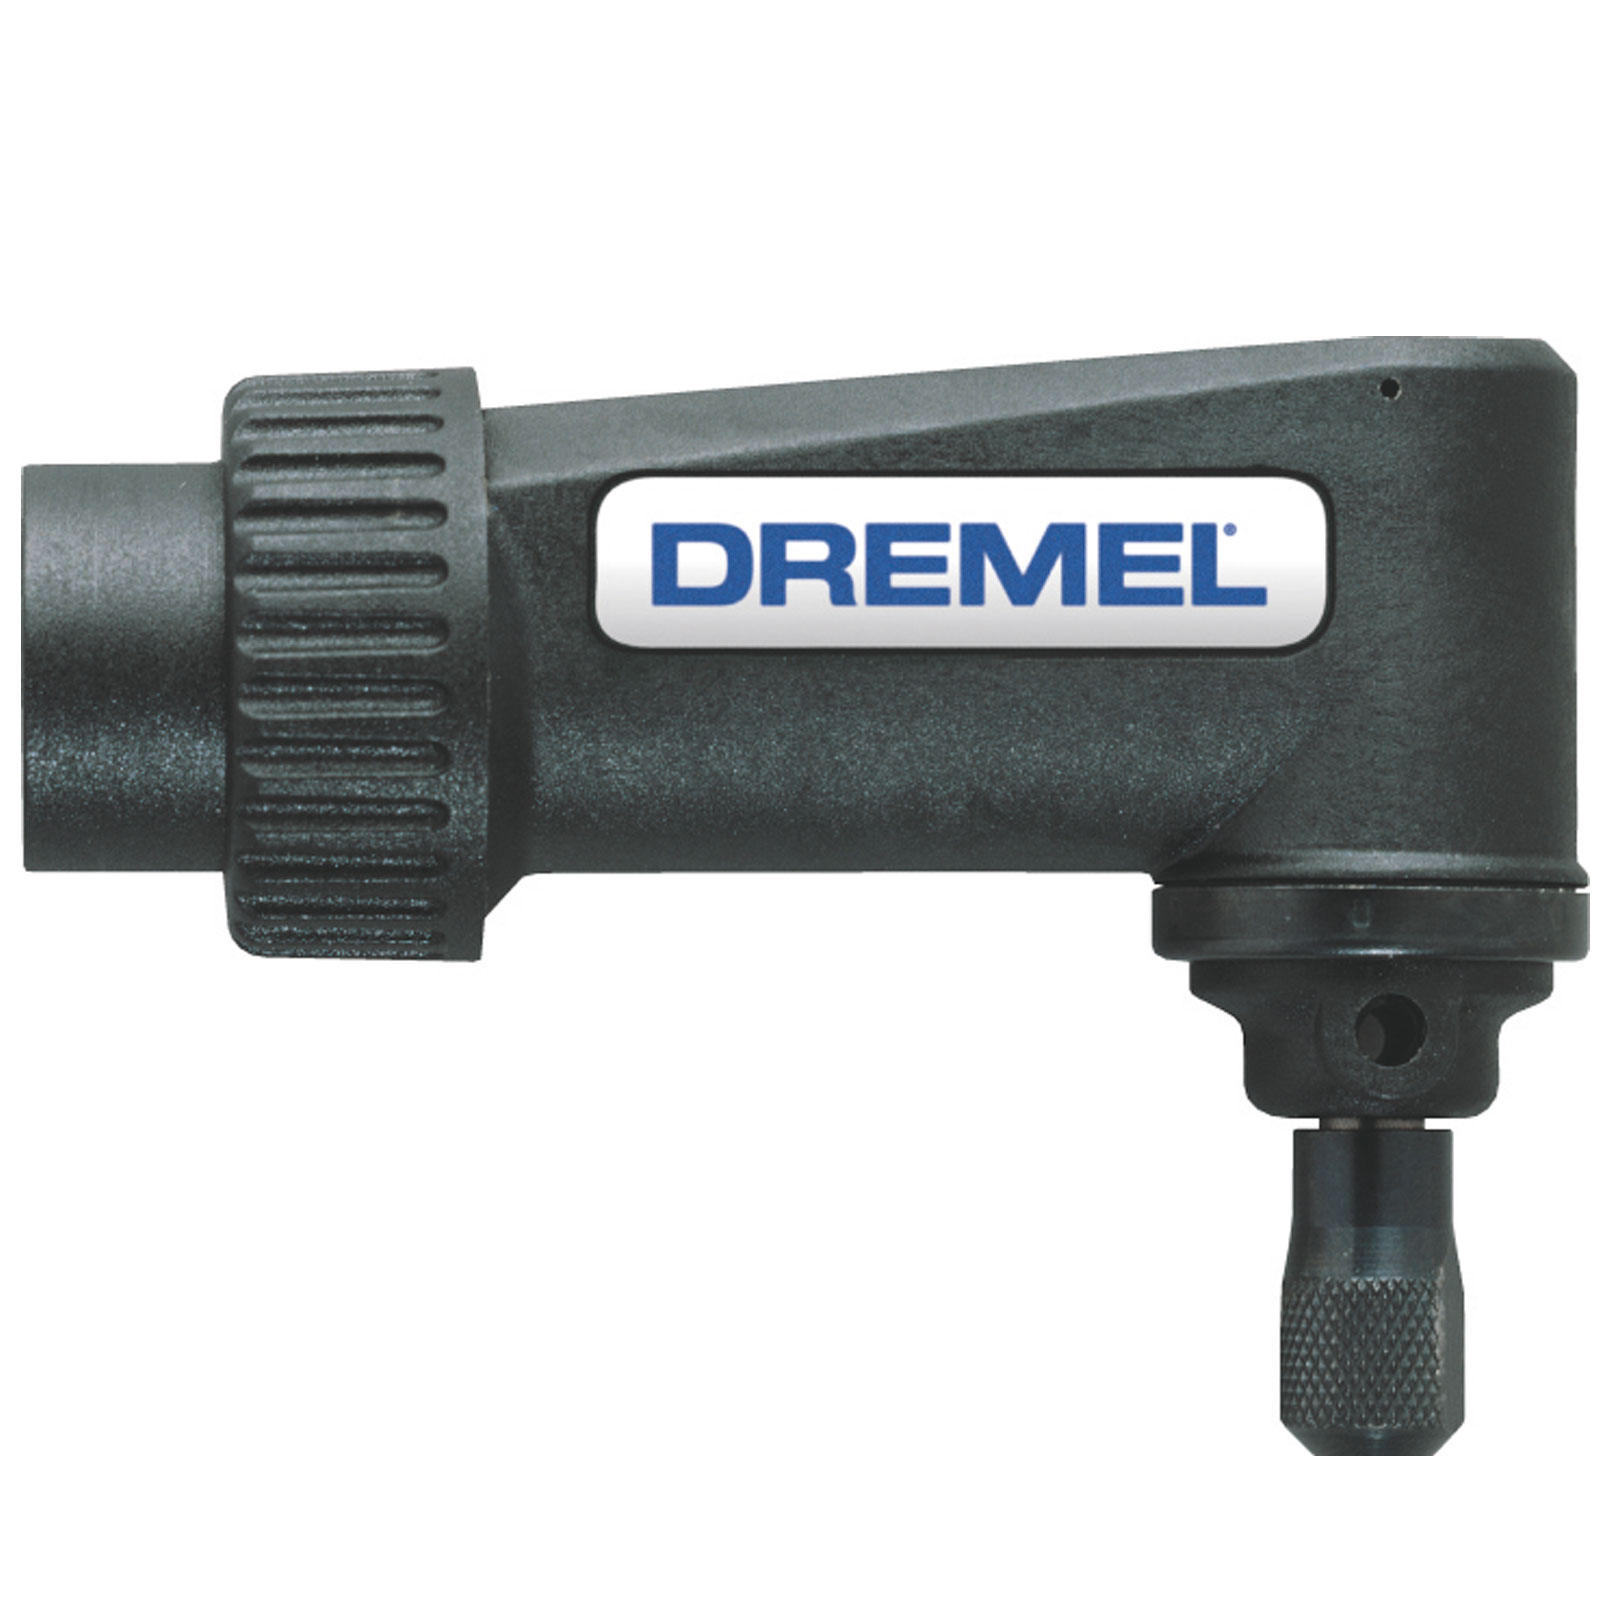 Image of Dremel 575 Rotary Multi Tool Right Angle Attachment